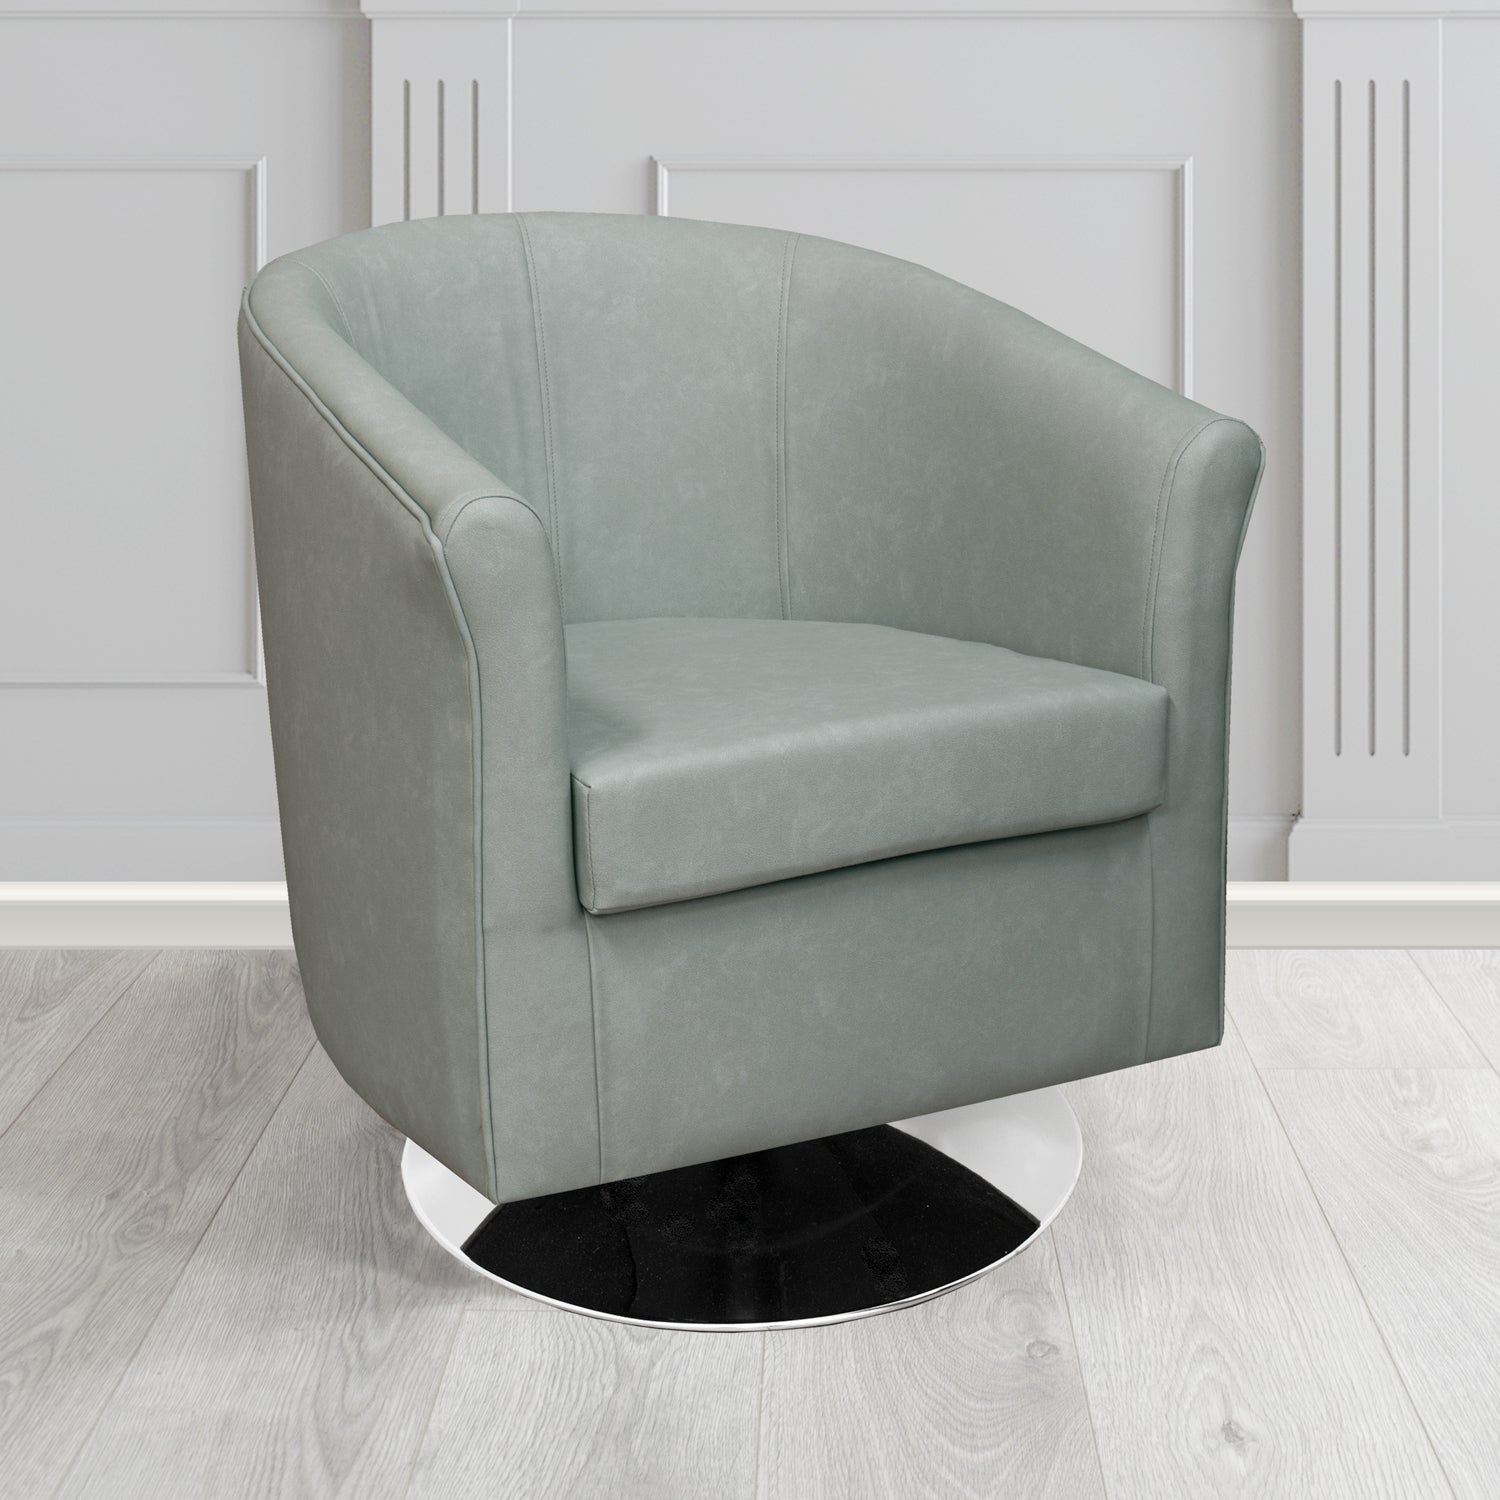 Tuscany Swivel Tub Chair in Infiniti Shadow INF1858 Antimicrobial Crib 5 Faux Leather - The Tub Chair Shop